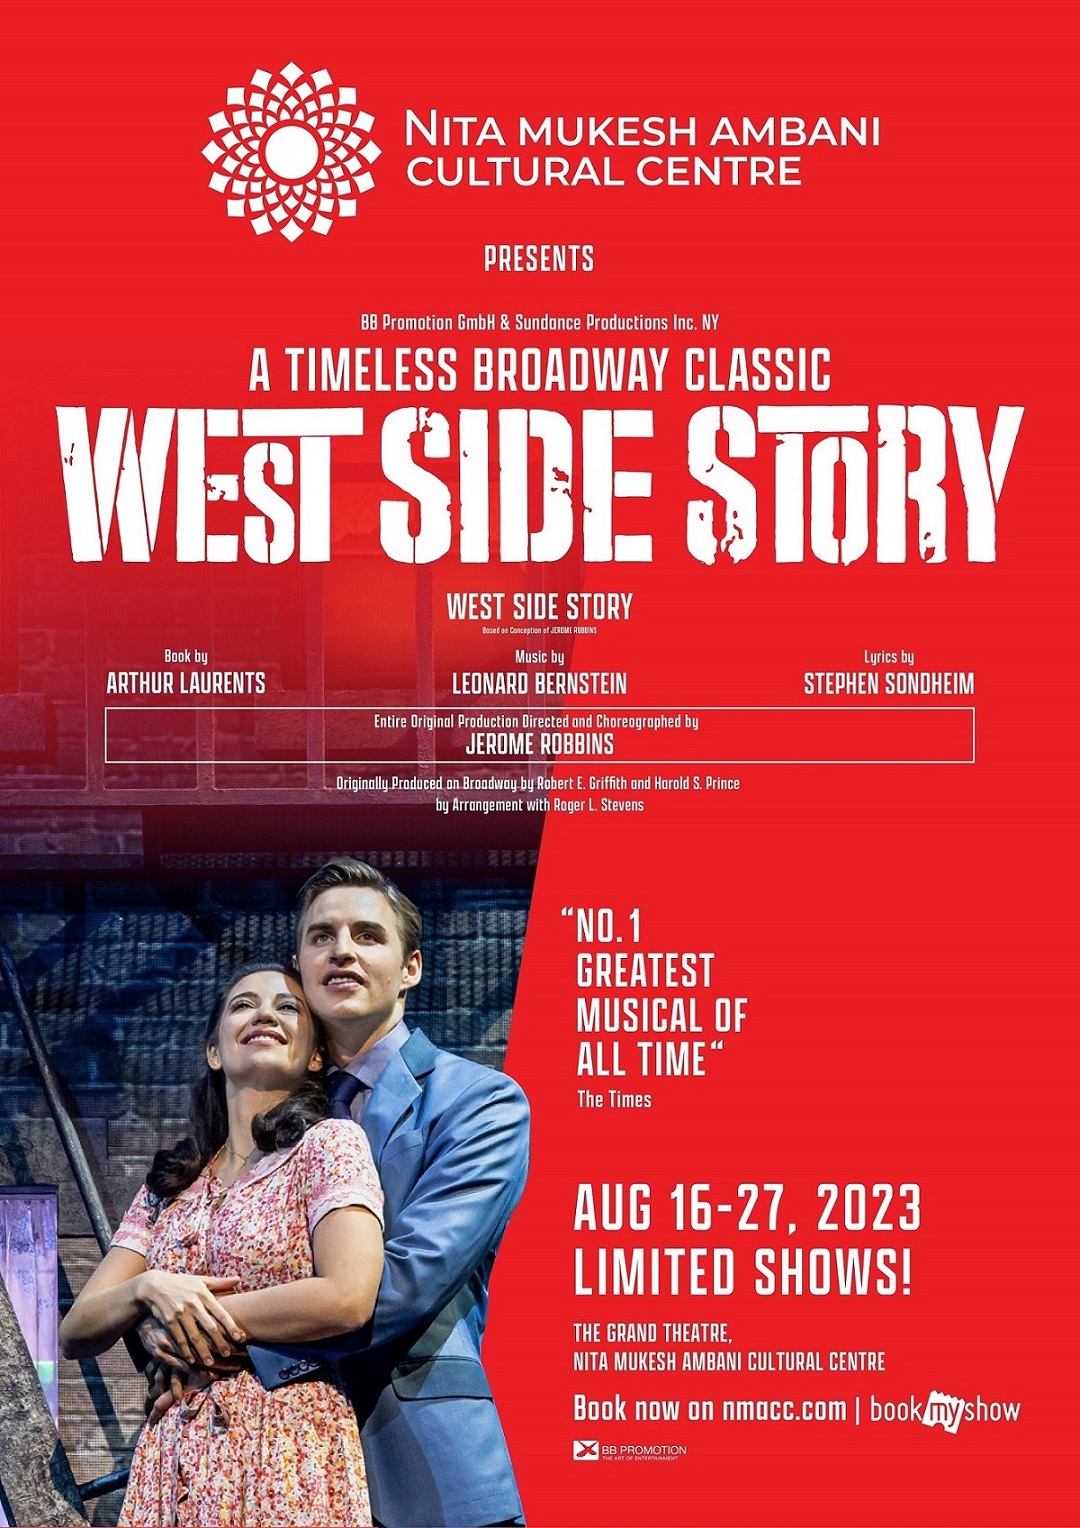 NMACC brings International Broadway musical ‘West Side Story’ to India for the first time